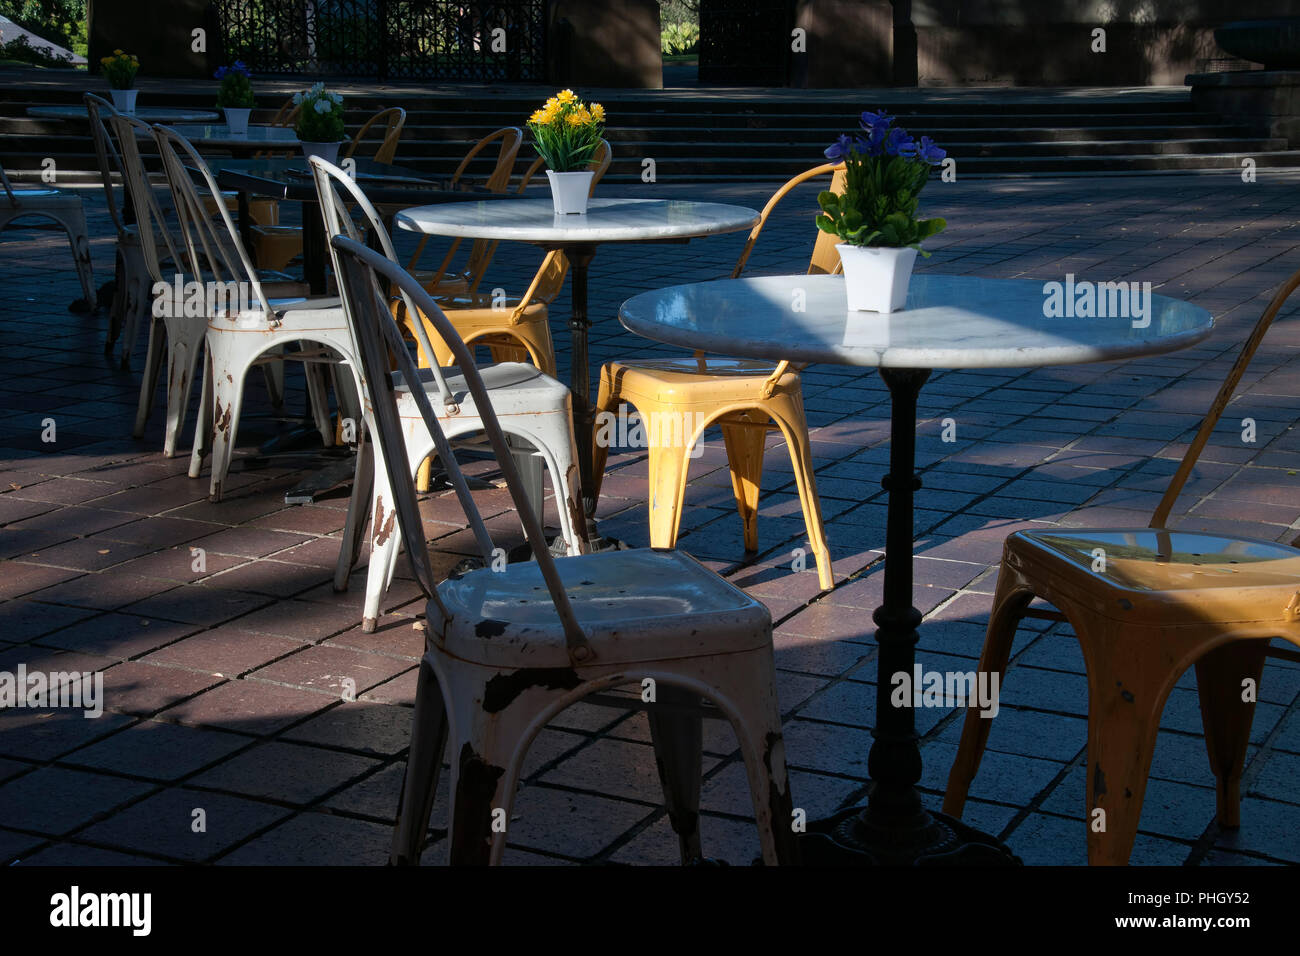 Sydney Australia, sidewalk cafe in the late afternoon shadows. Stock Photo